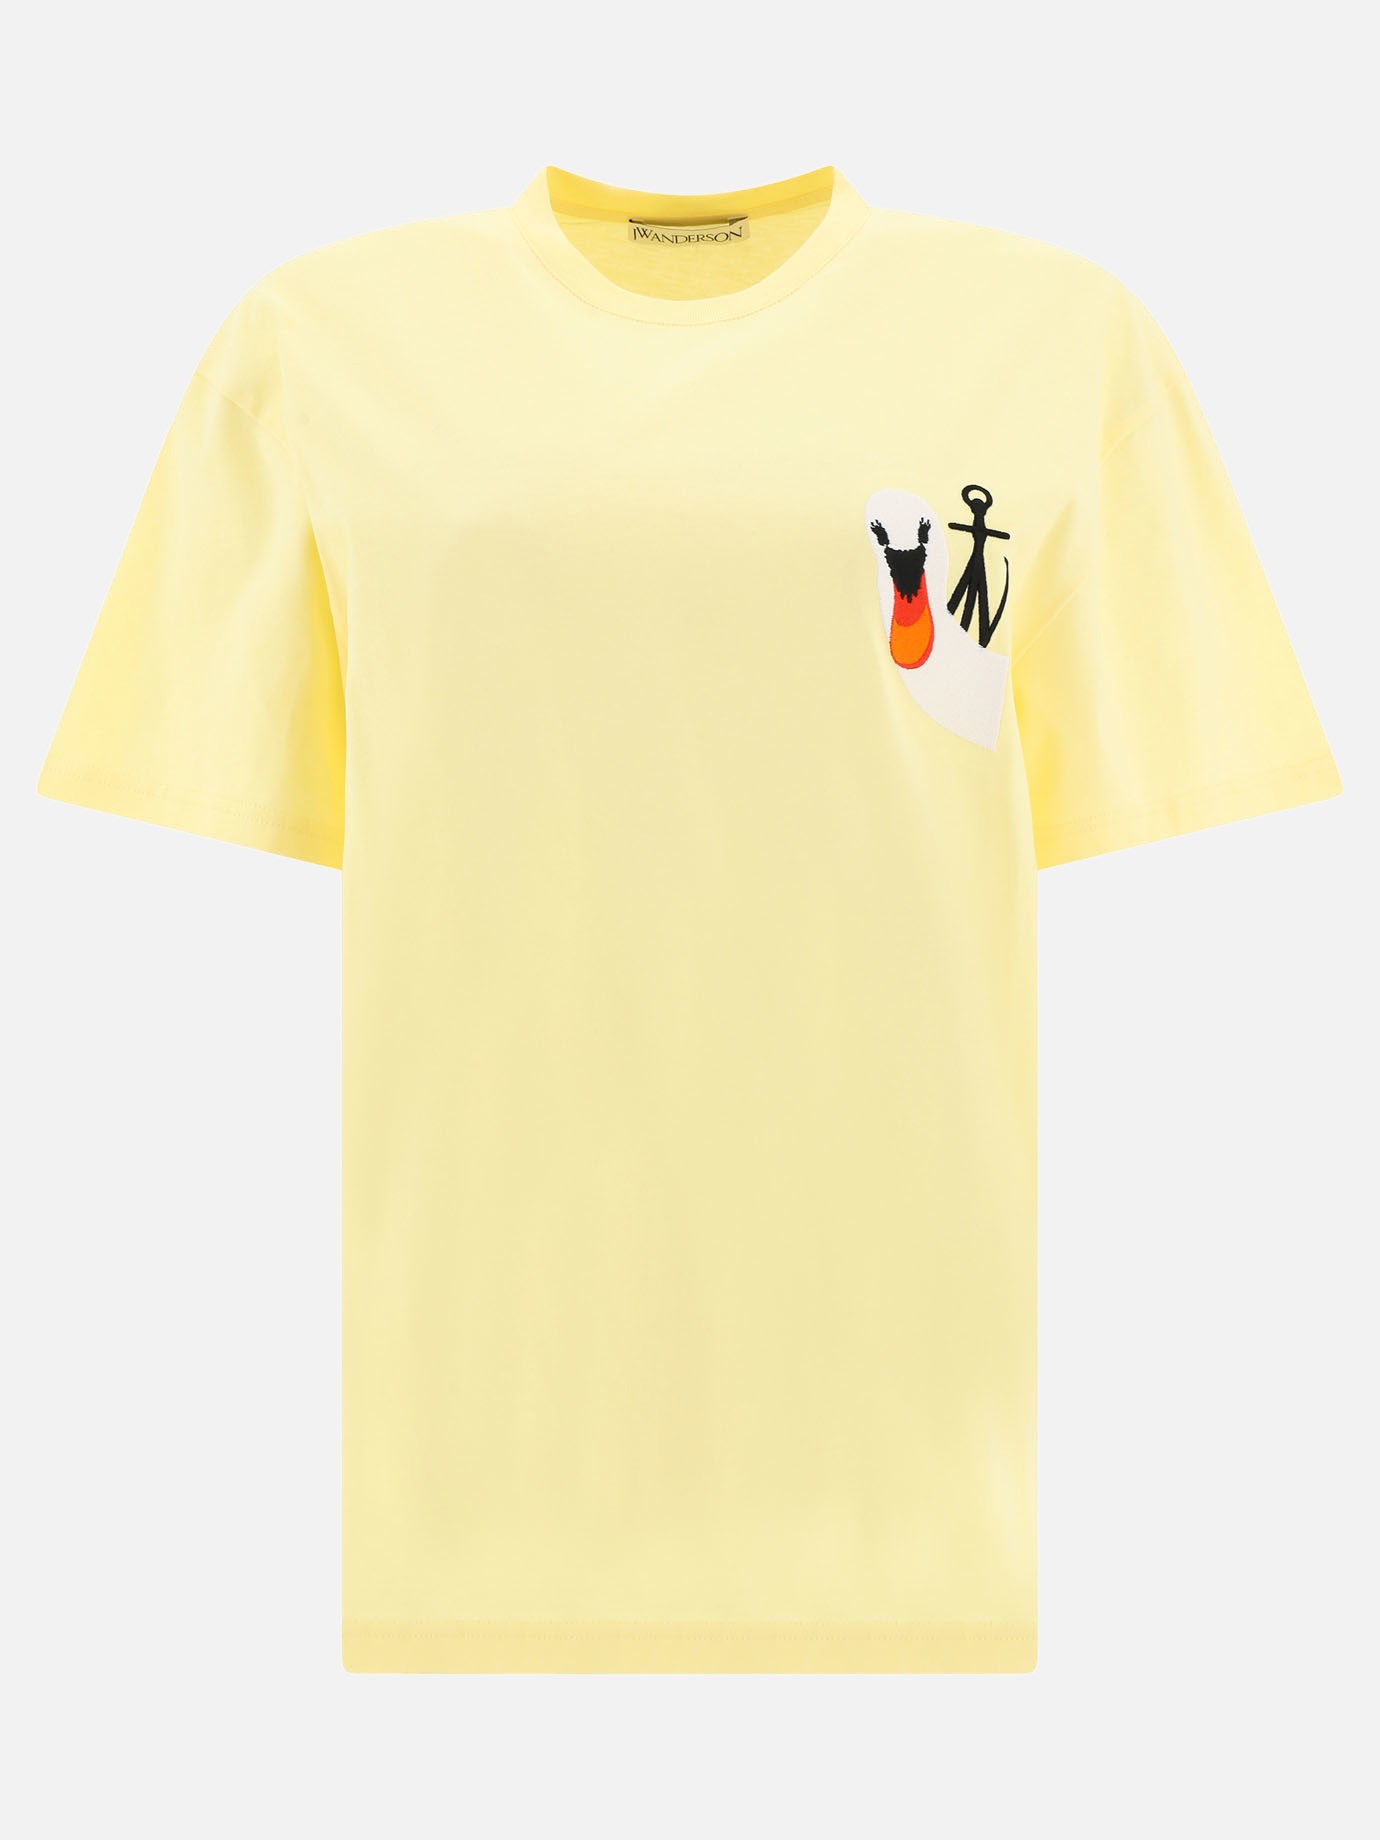  Swan  t-shirtby JW Anderson - 4